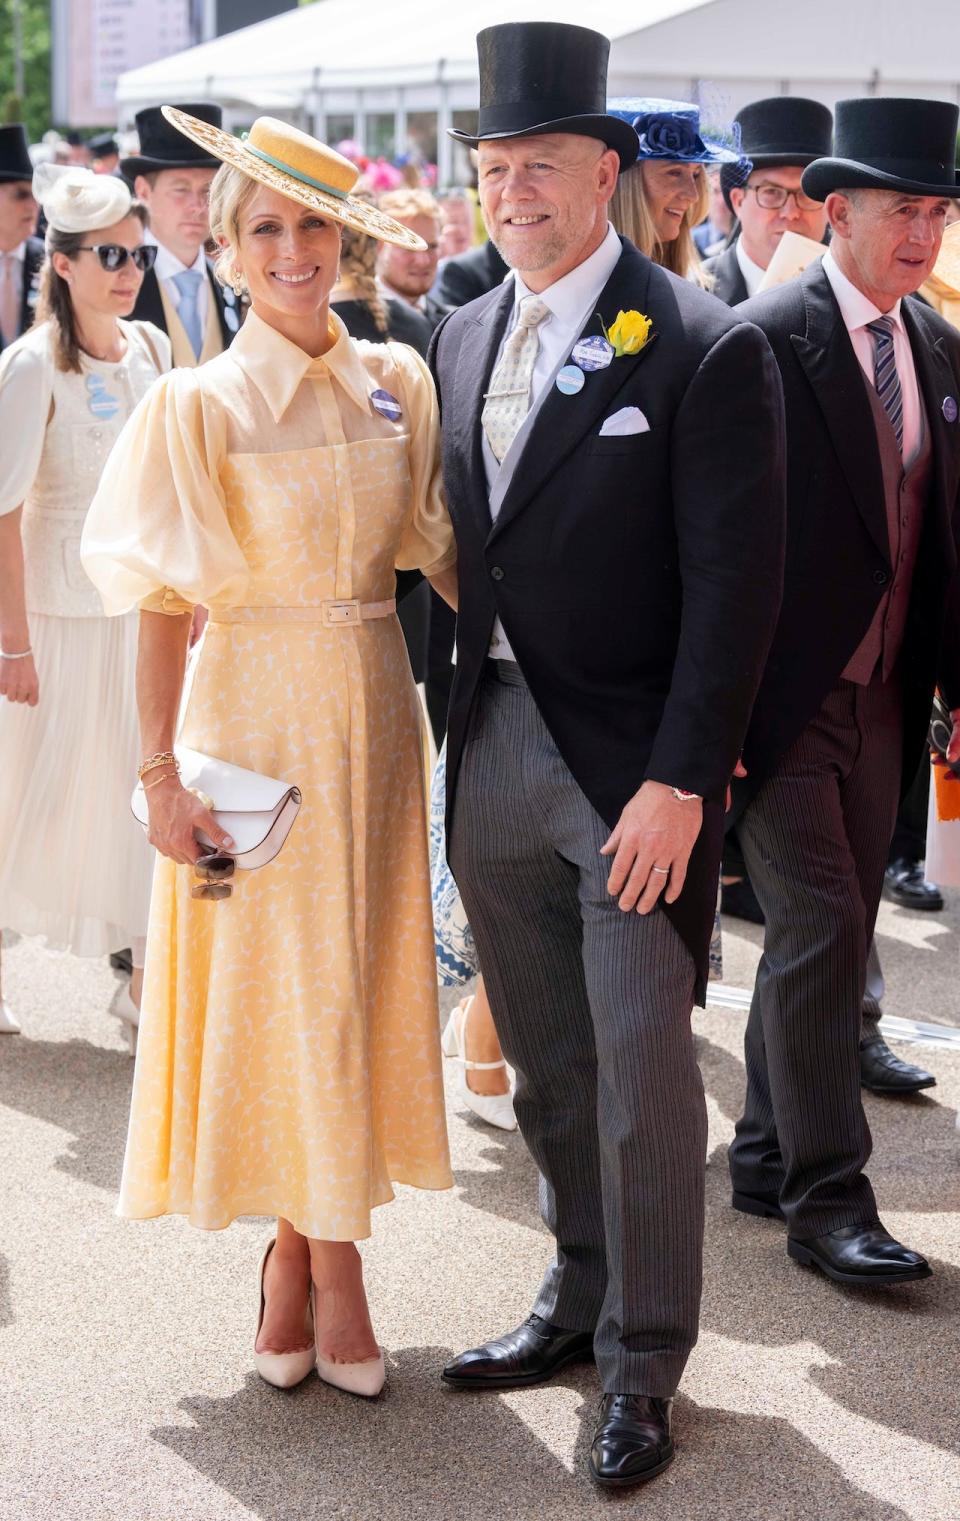 Zara Tindall posing in a yellow dress alongside her husband Mike Tindall, who is wearing a black and gray morning suit.